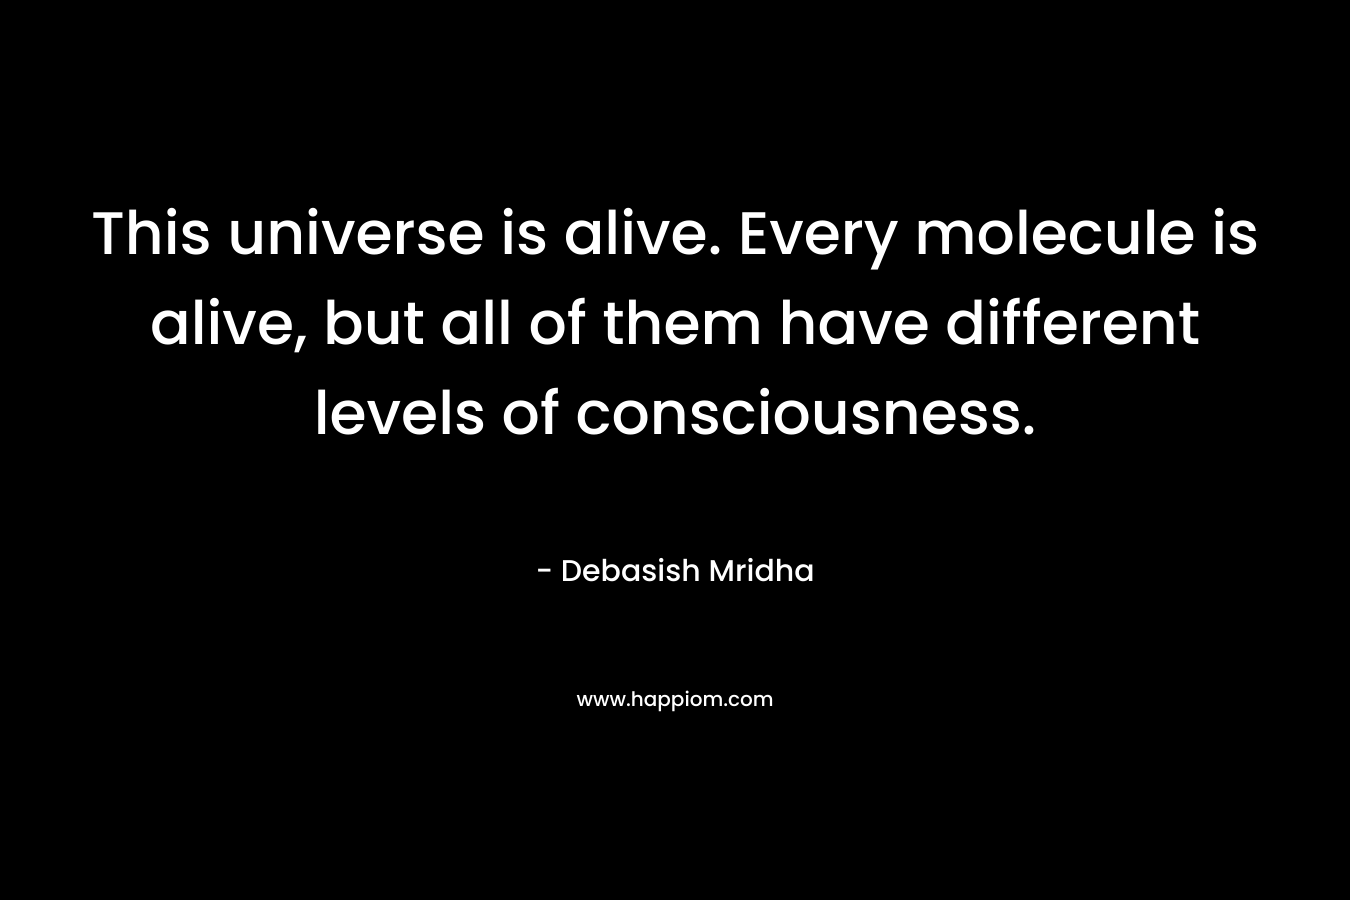 This universe is alive. Every molecule is alive, but all of them have different levels of consciousness.